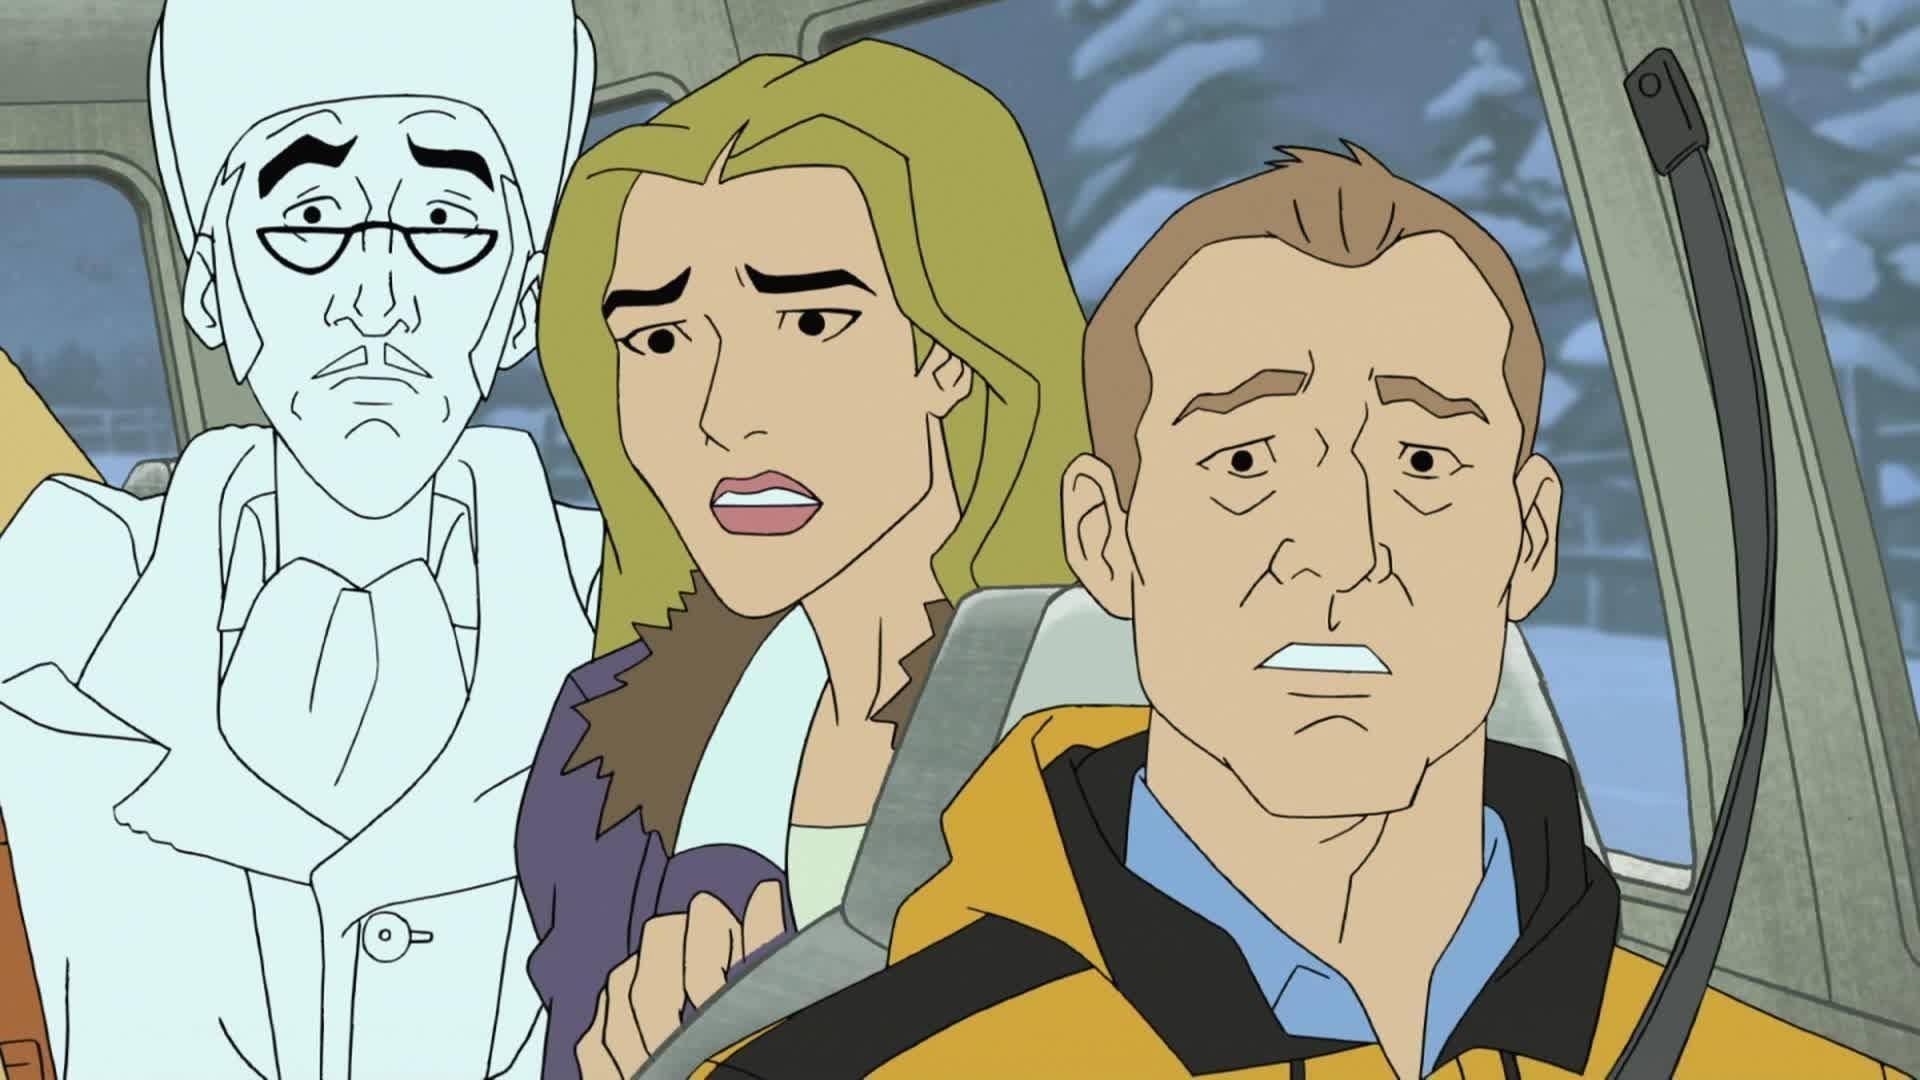 Mike Tyson Solving Mysteries With His Eclectic Team In "mike Tyson Mysteries". Wallpaper